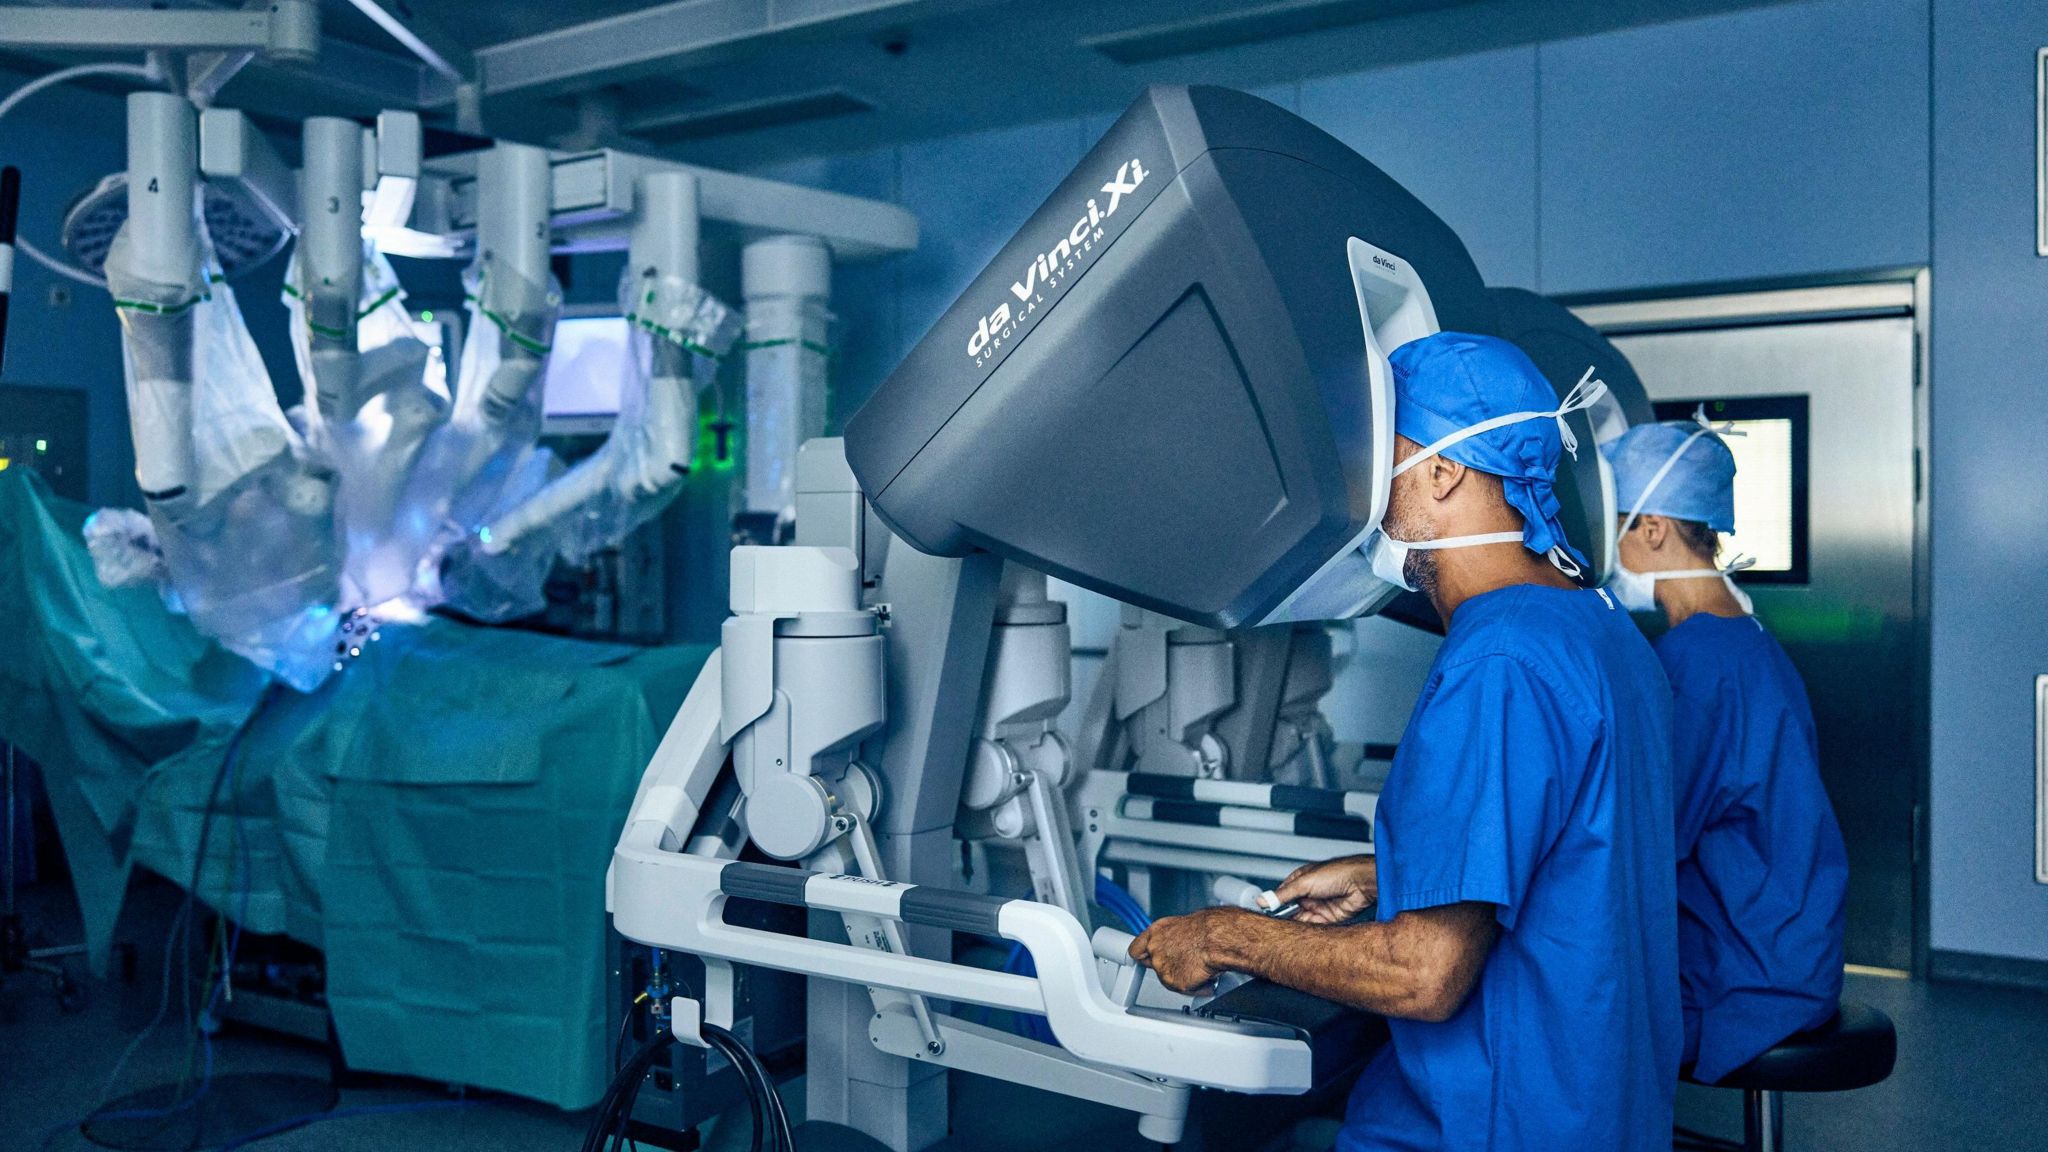 Two surgeons operating a robotic system